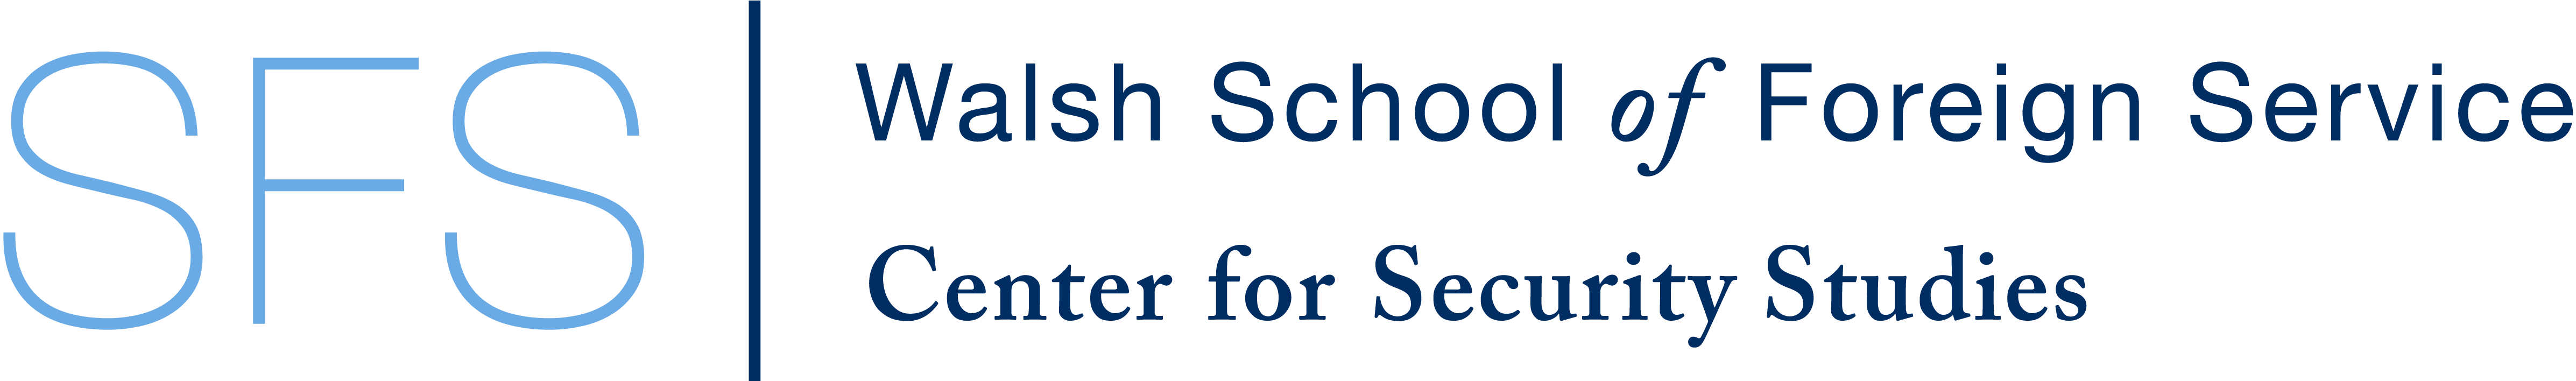 Logo for the Center for Security Studies, part of the Walsh School of Foreign Service (SFS)